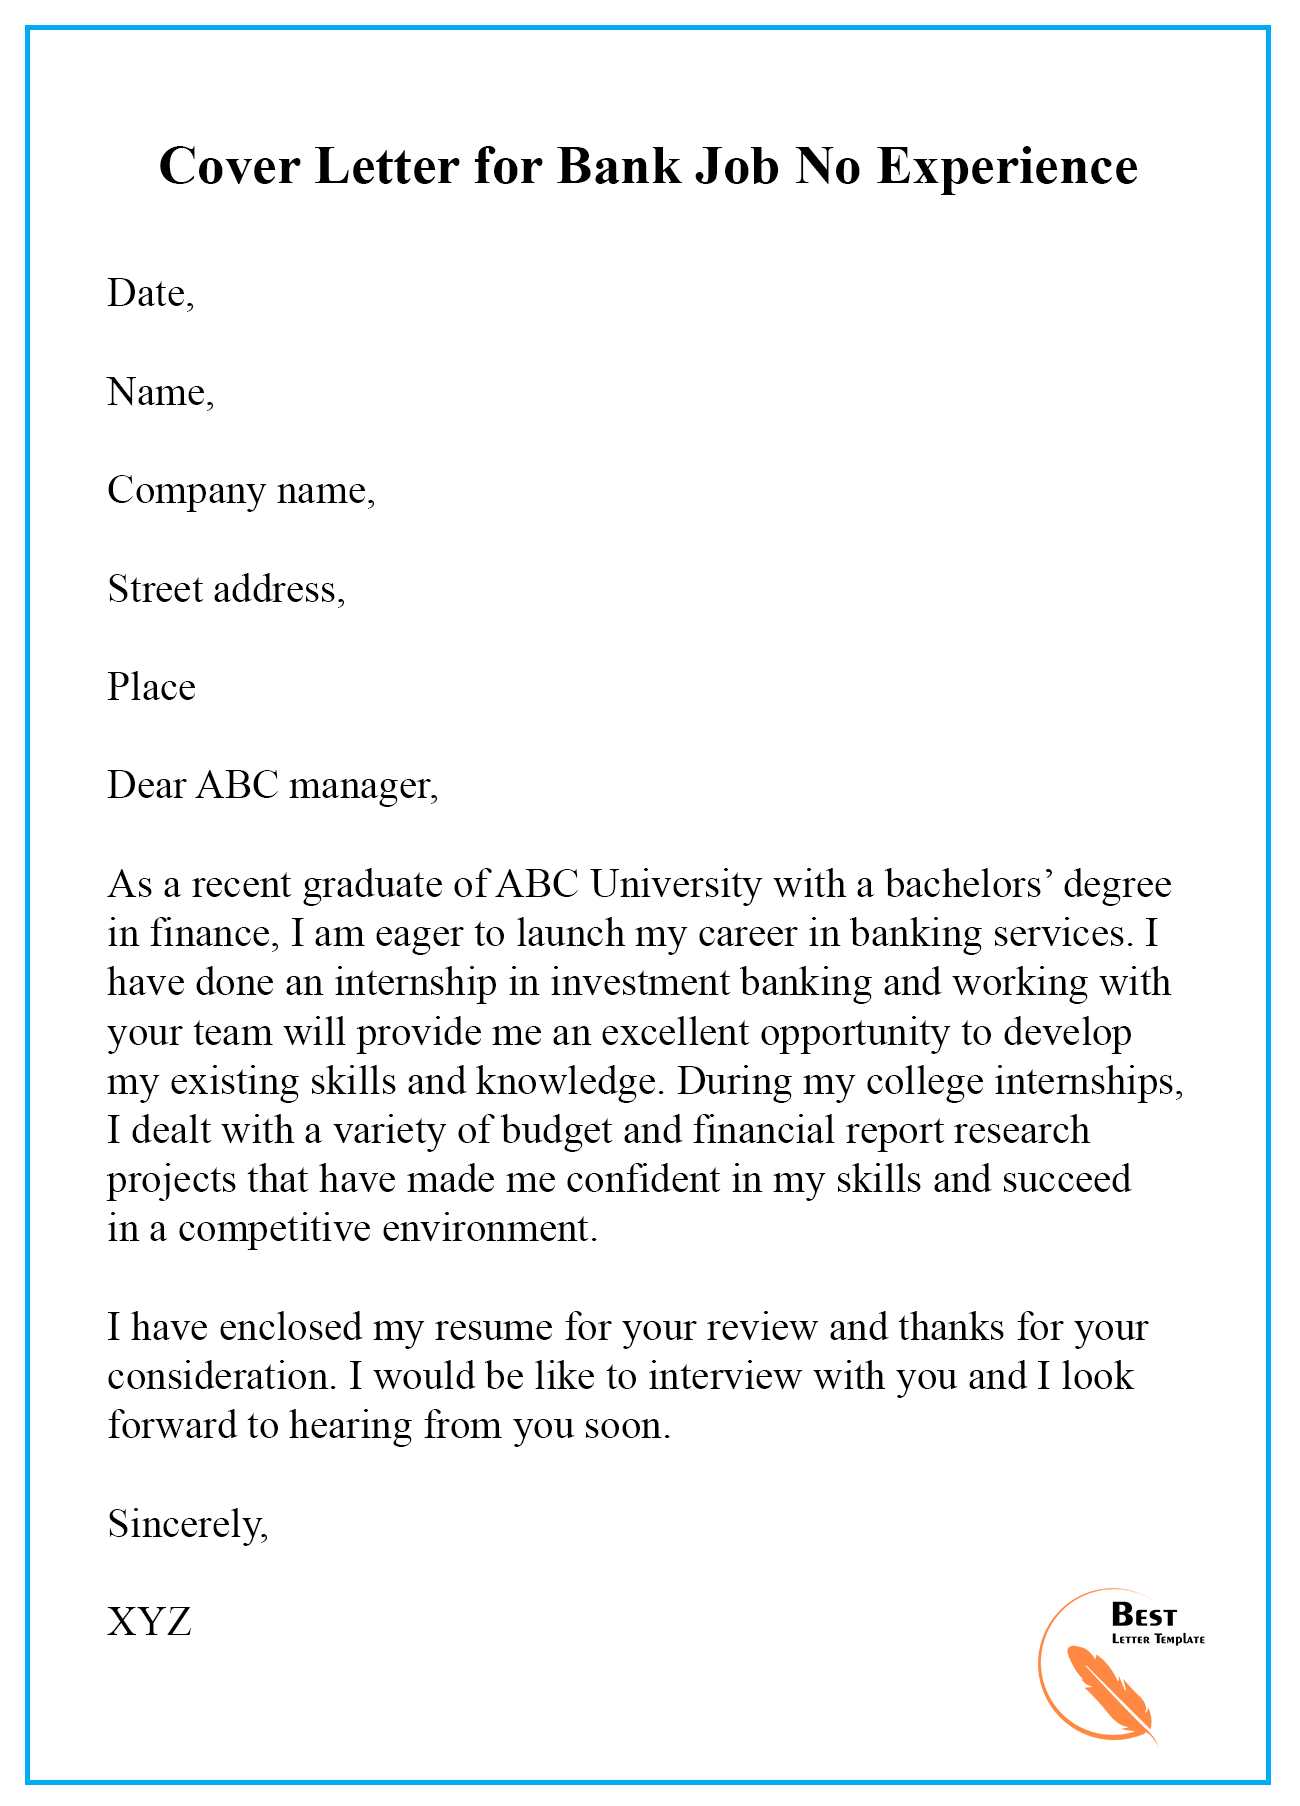 Cover Letter With No Experience from bestlettertemplate.com